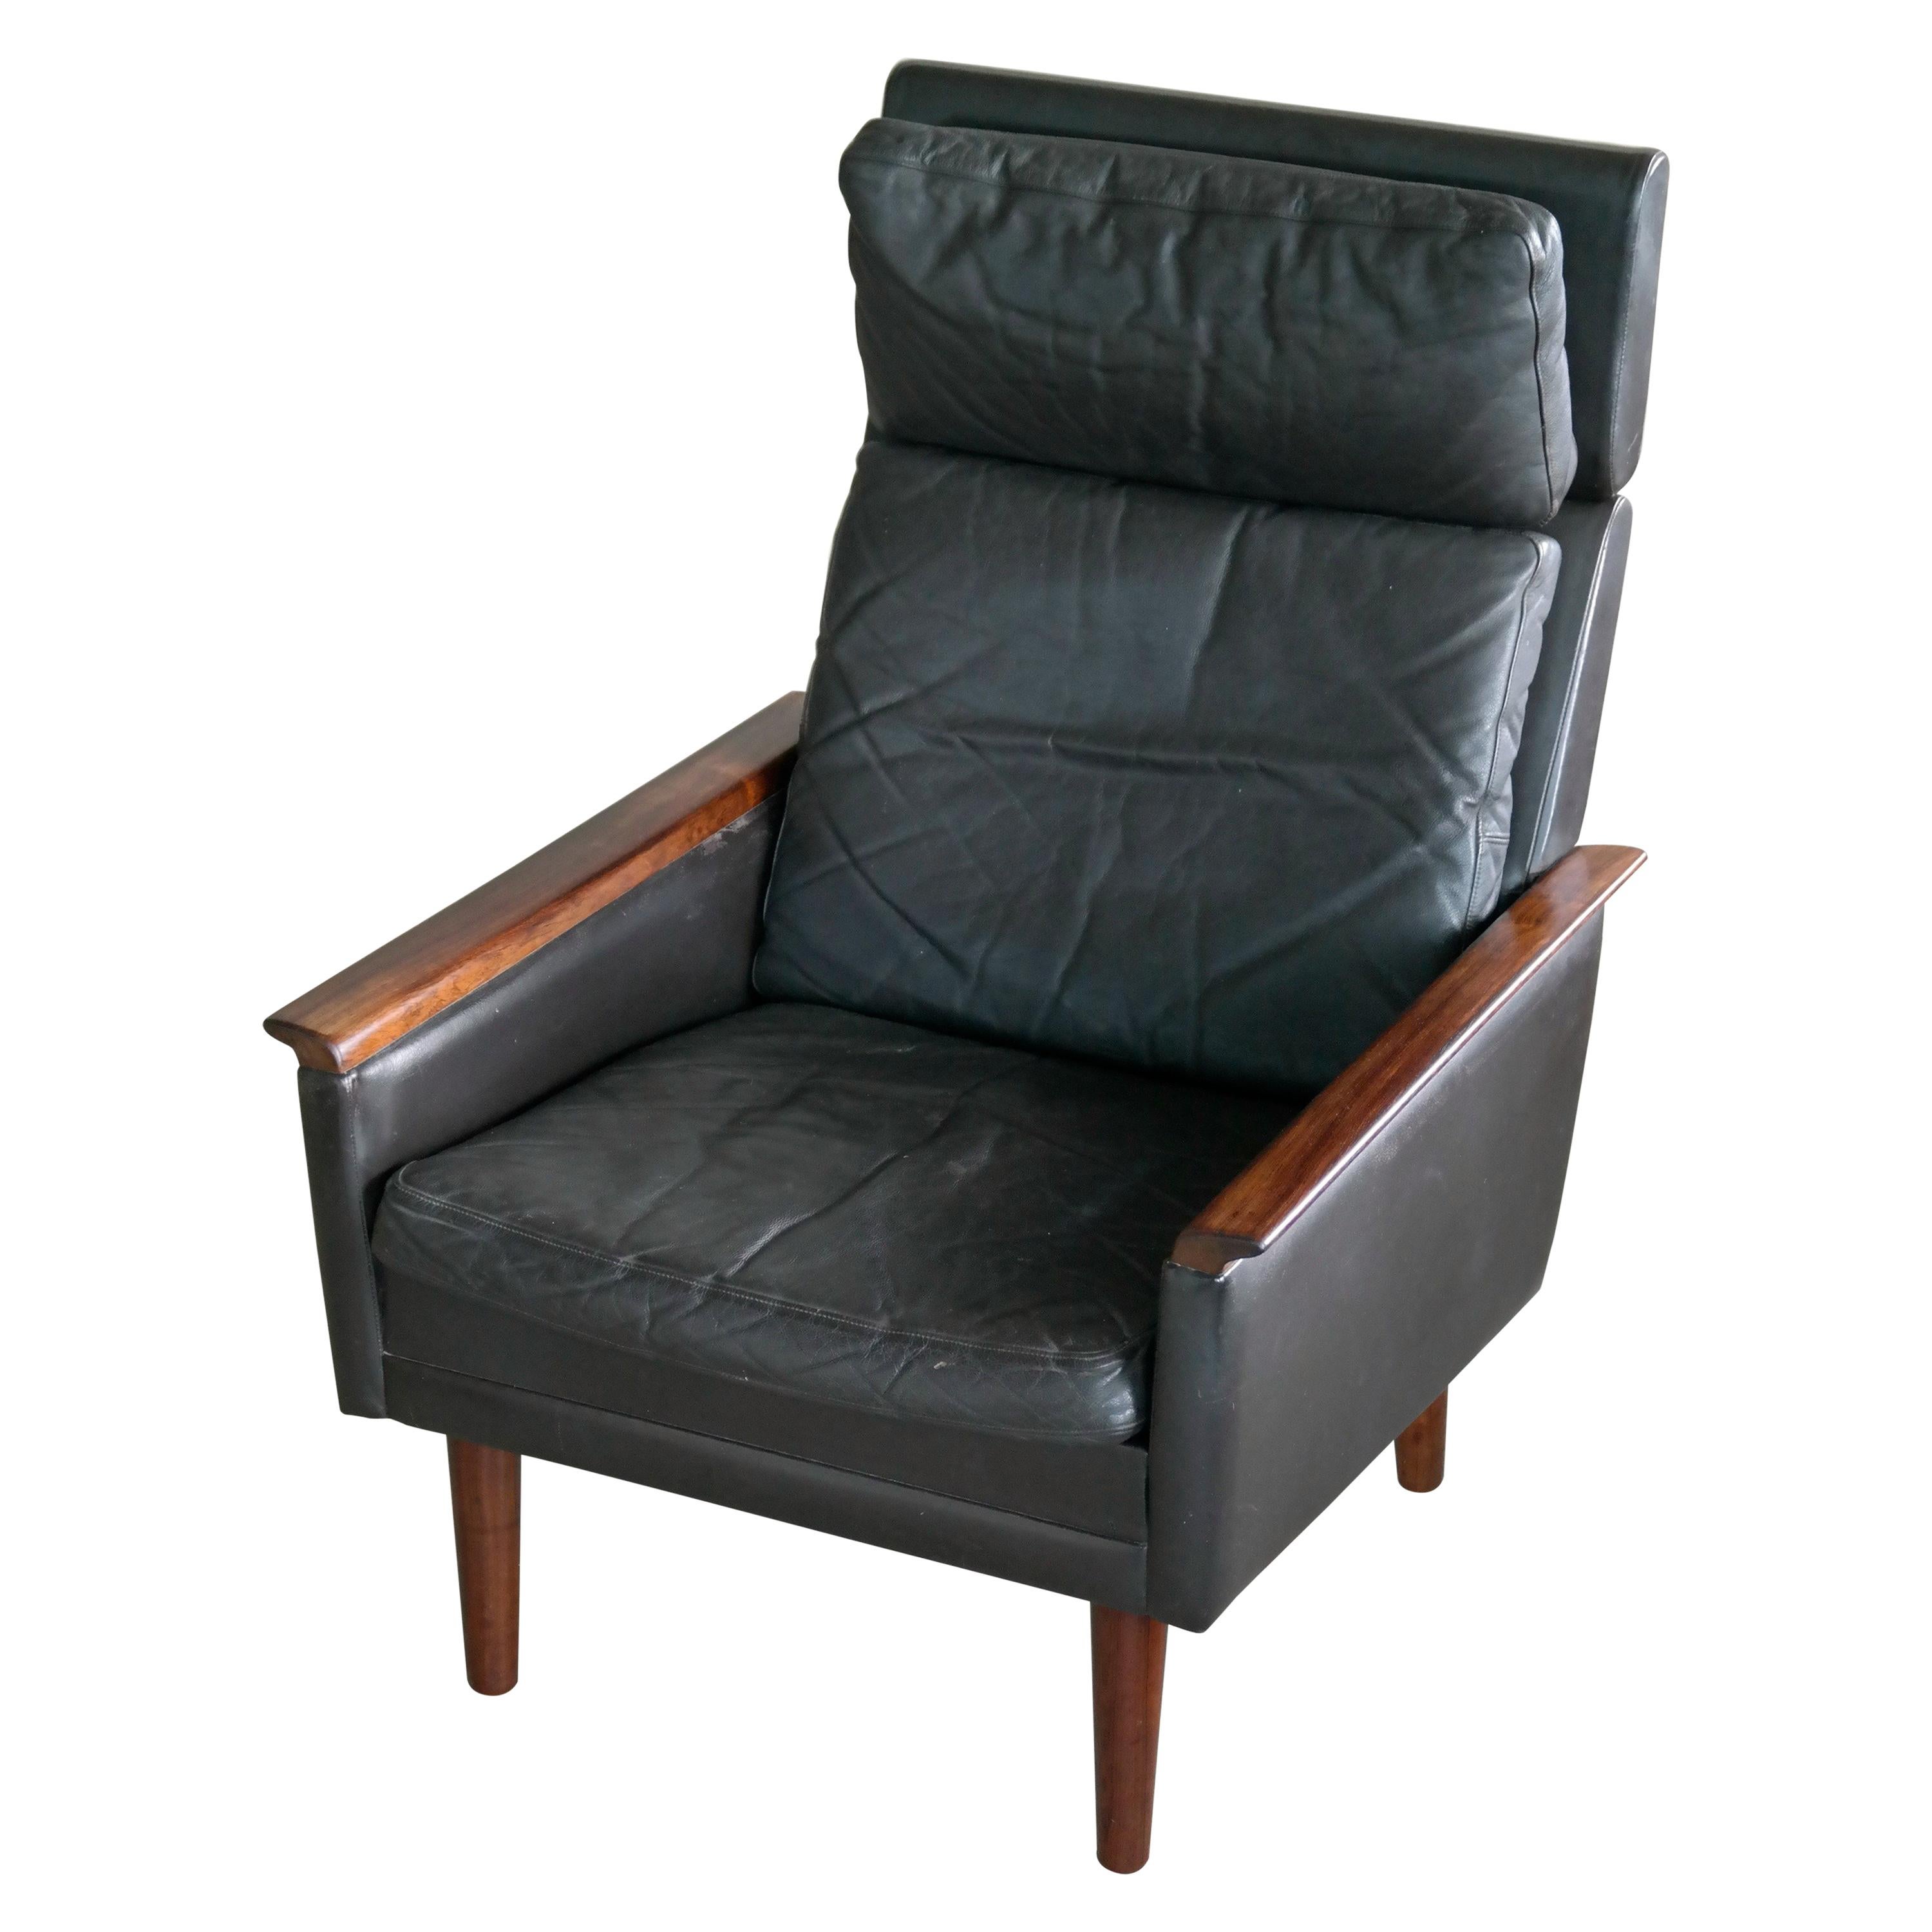 Danish Midcentury High Back Lounge Chair in Leather and Rosewood by Erik Wørts